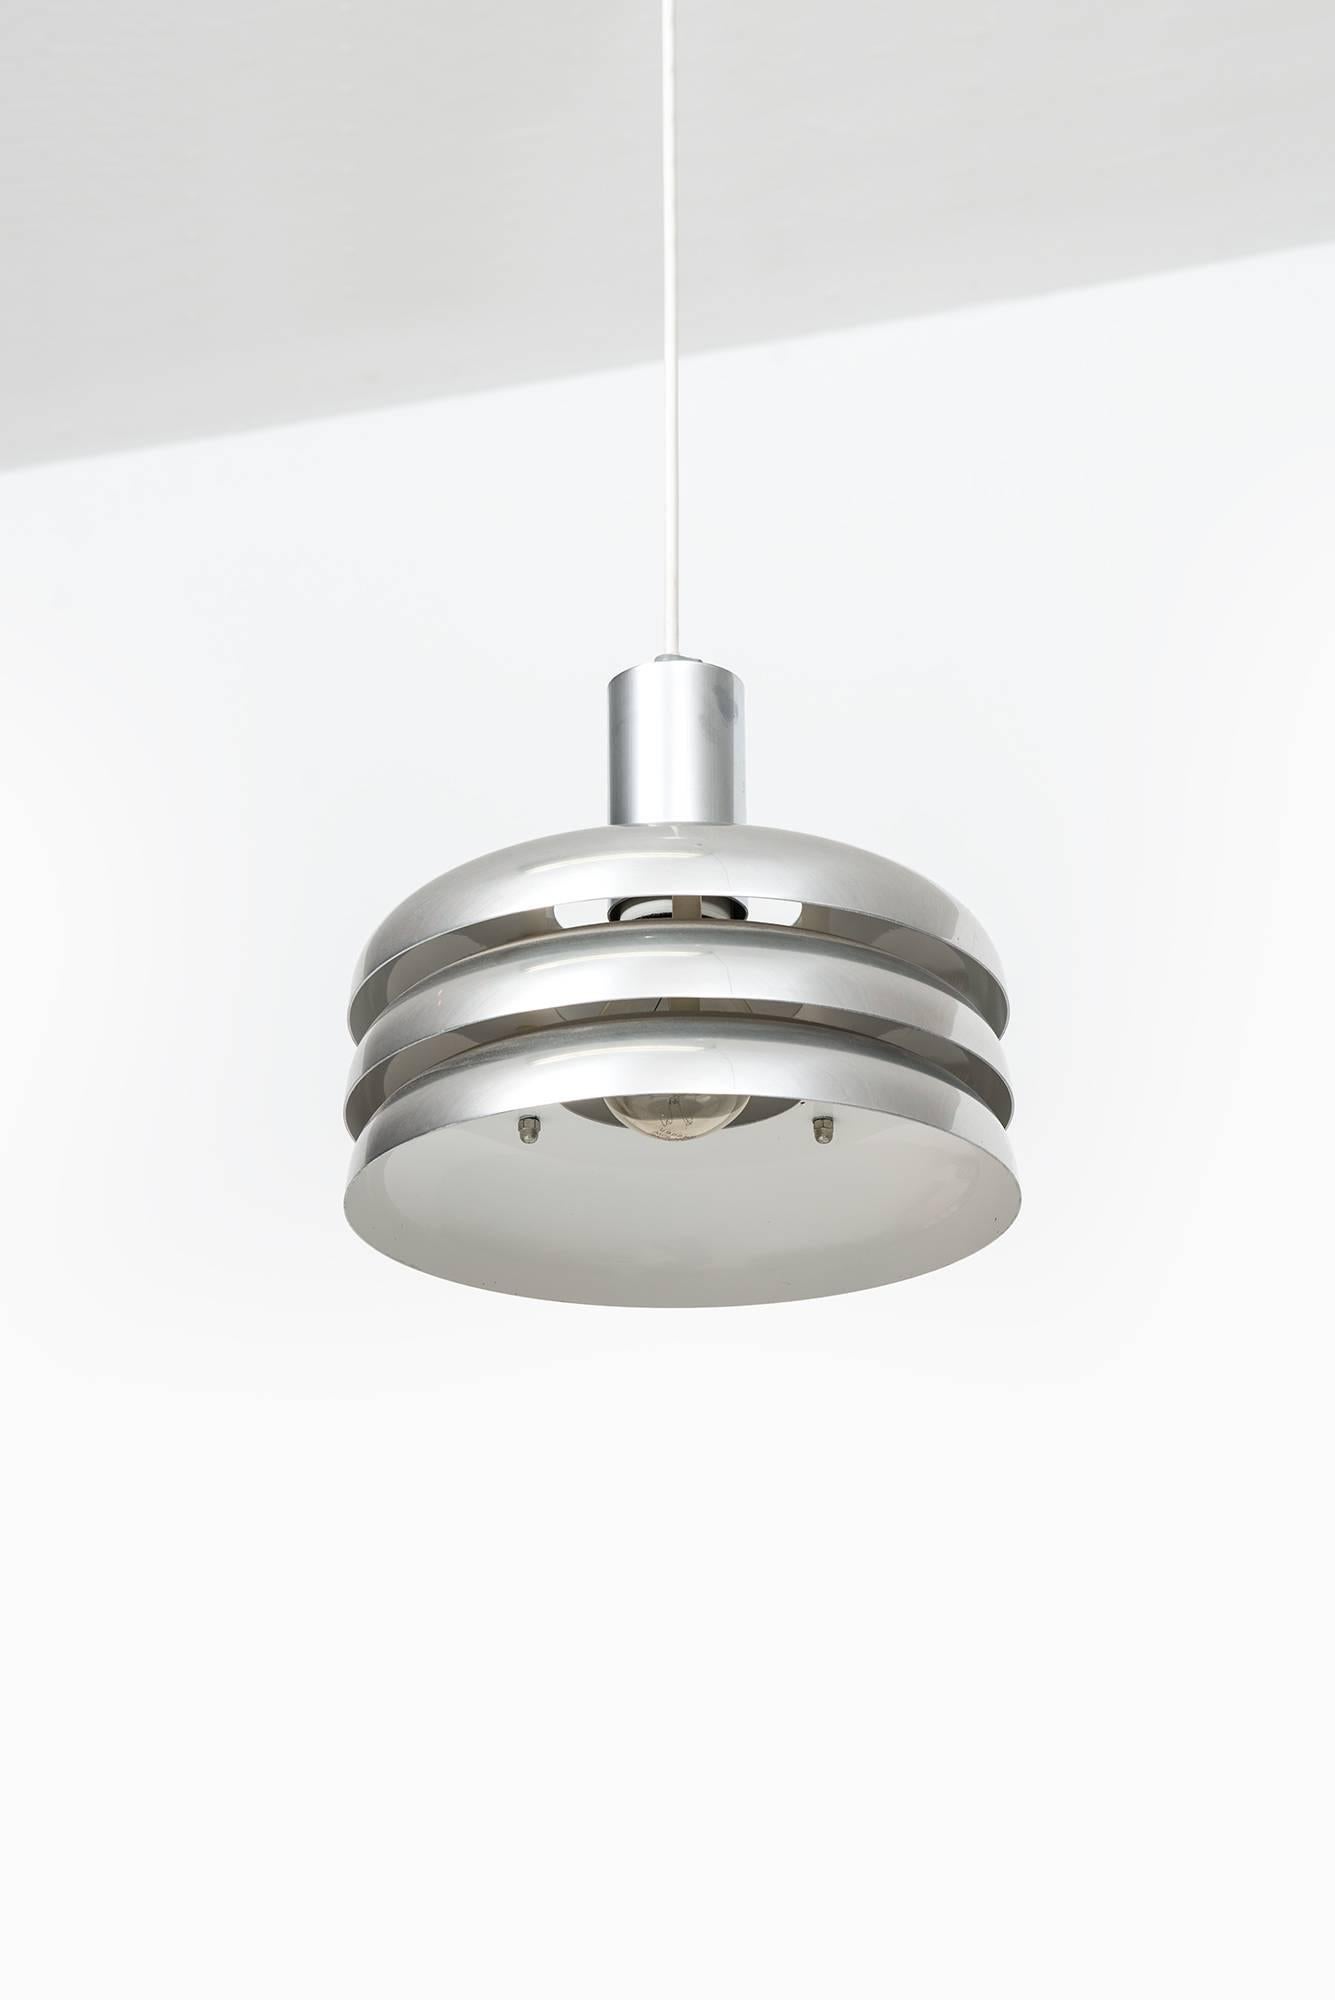 A set of three ceiling lamps model T-724 / ‘Lamingo’ designed by Hans-Agne Jakobsson. Produced by Hans-Agne Jakobsson AB in Markaryd, Sweden.